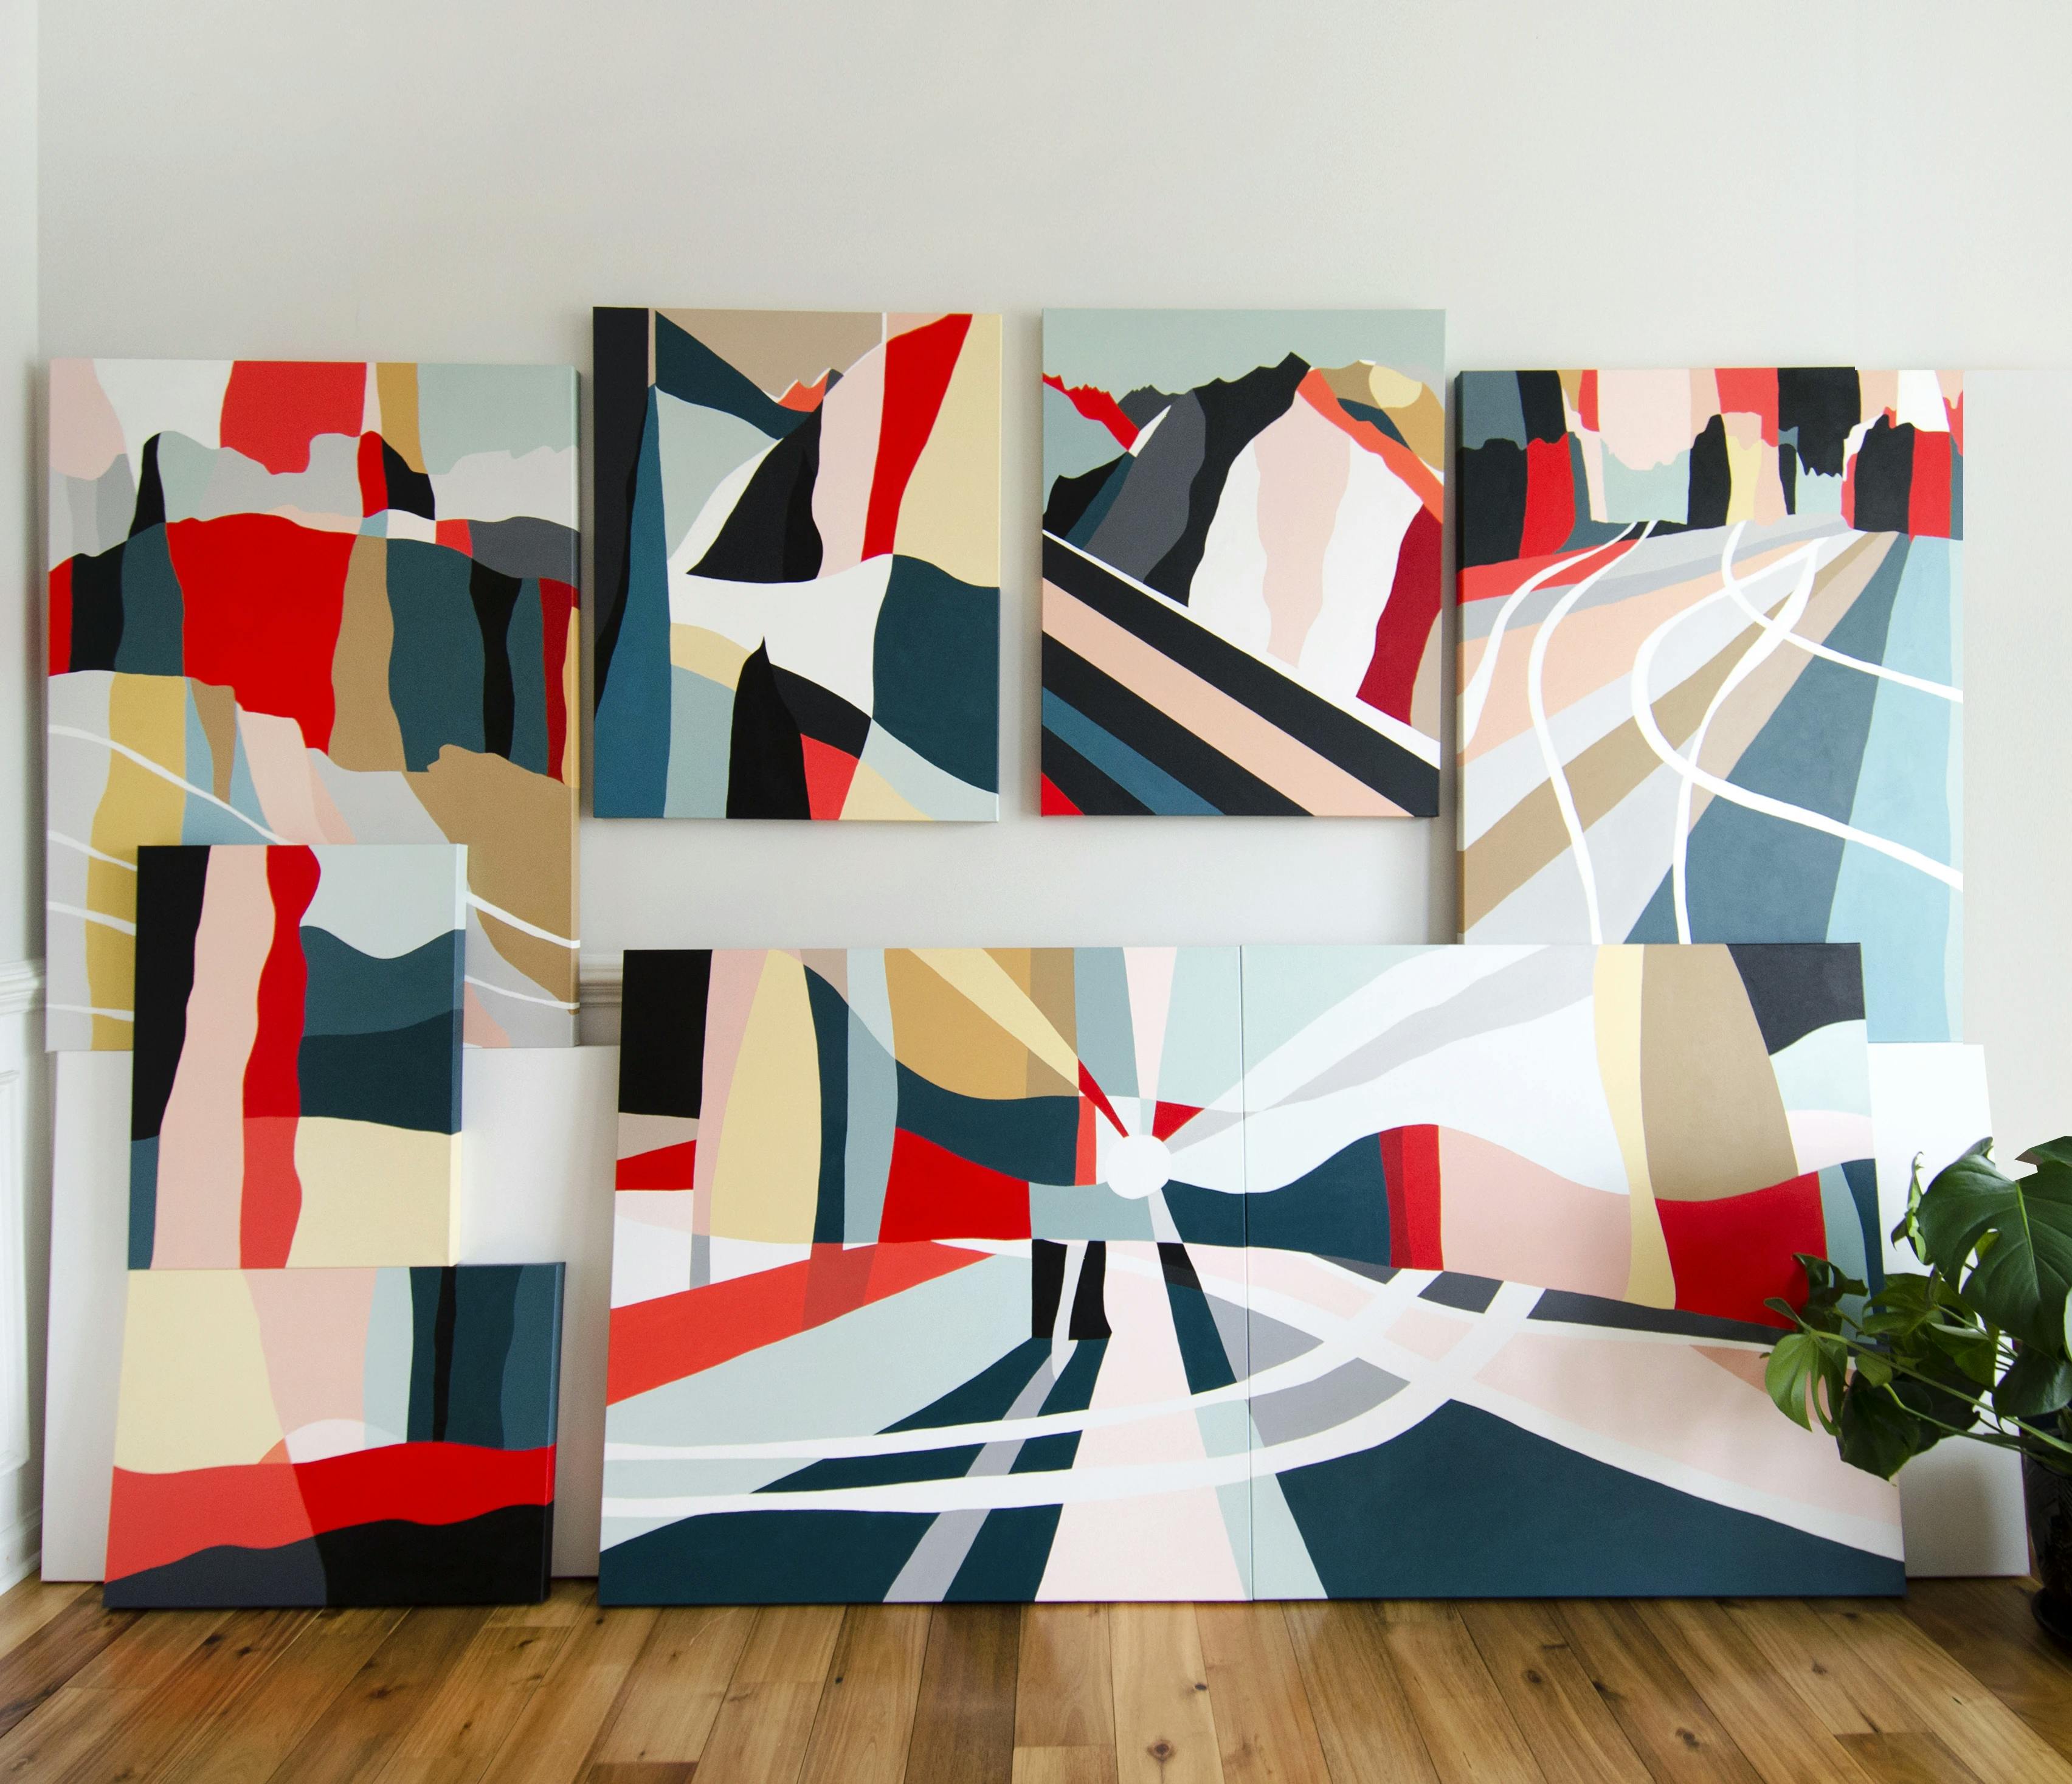 A collection of bold, abstract works on canvas by artist Christina Flowers.